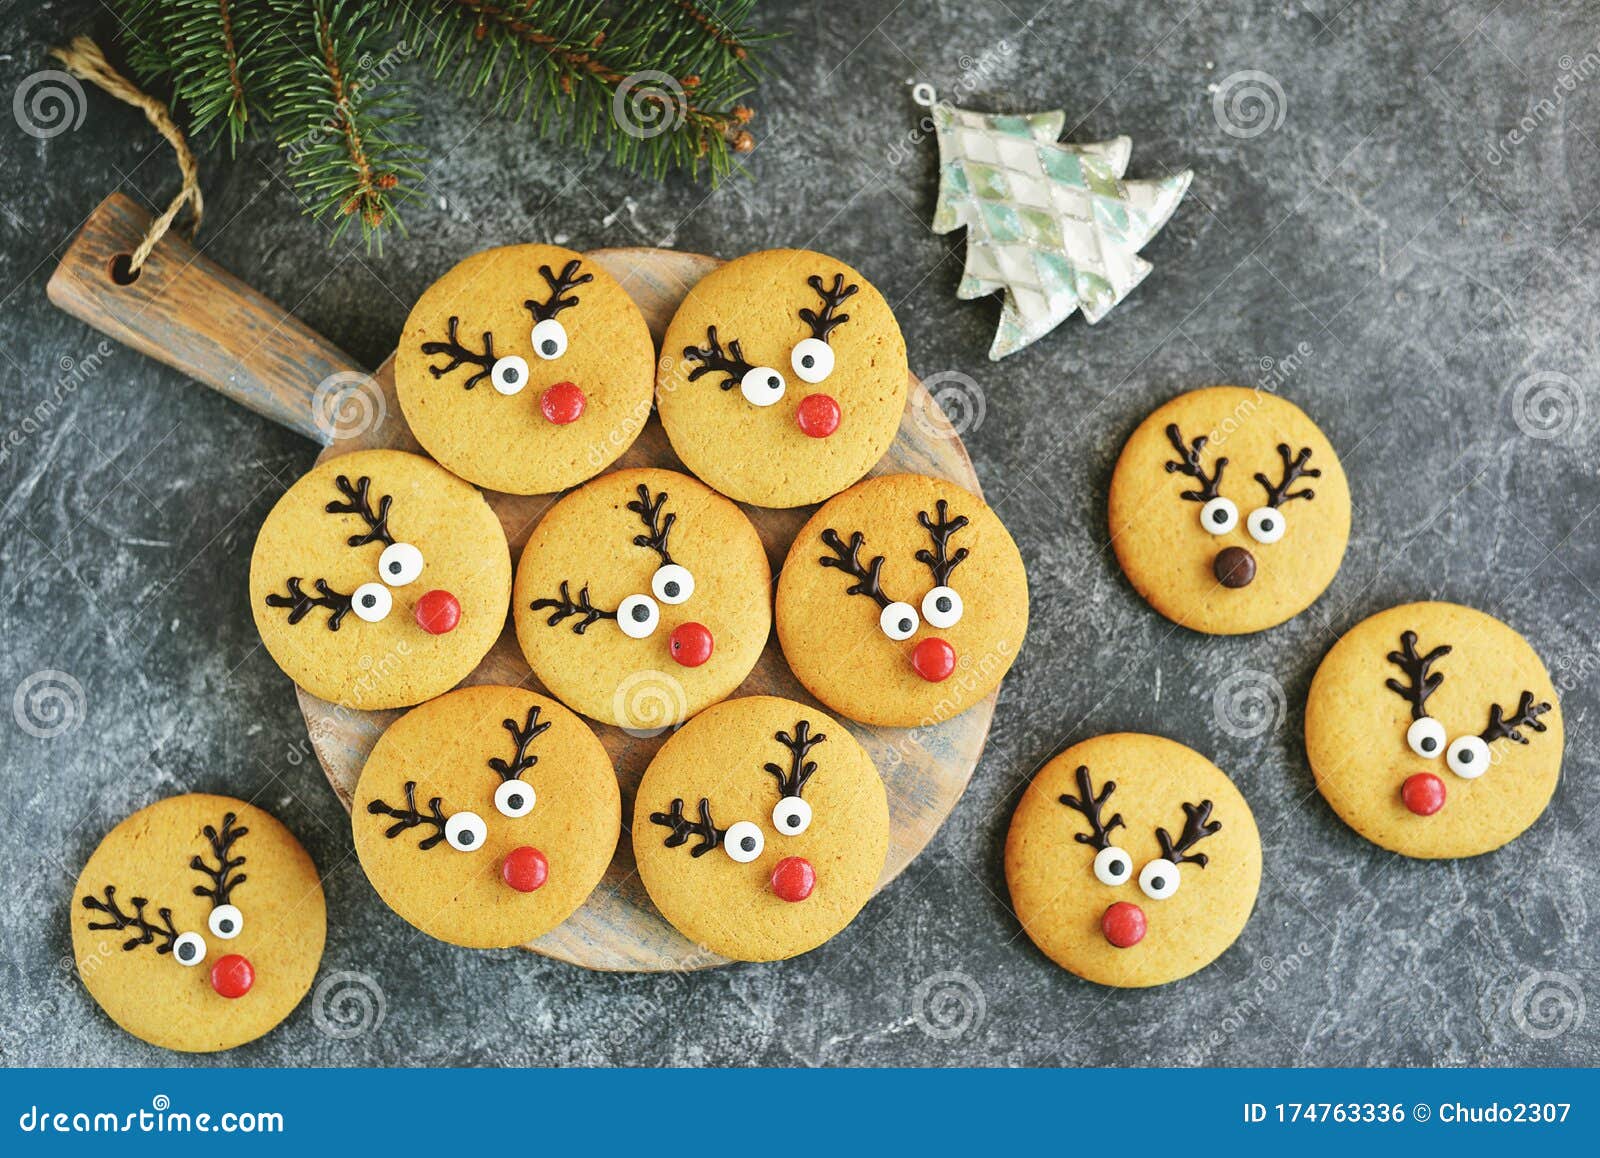 Cute New Year And Christmas Gingerbreads Santa Deer Homemade Christmas Baking Christmas Cookies Stock Photo Image Of Root Cookie 174763336